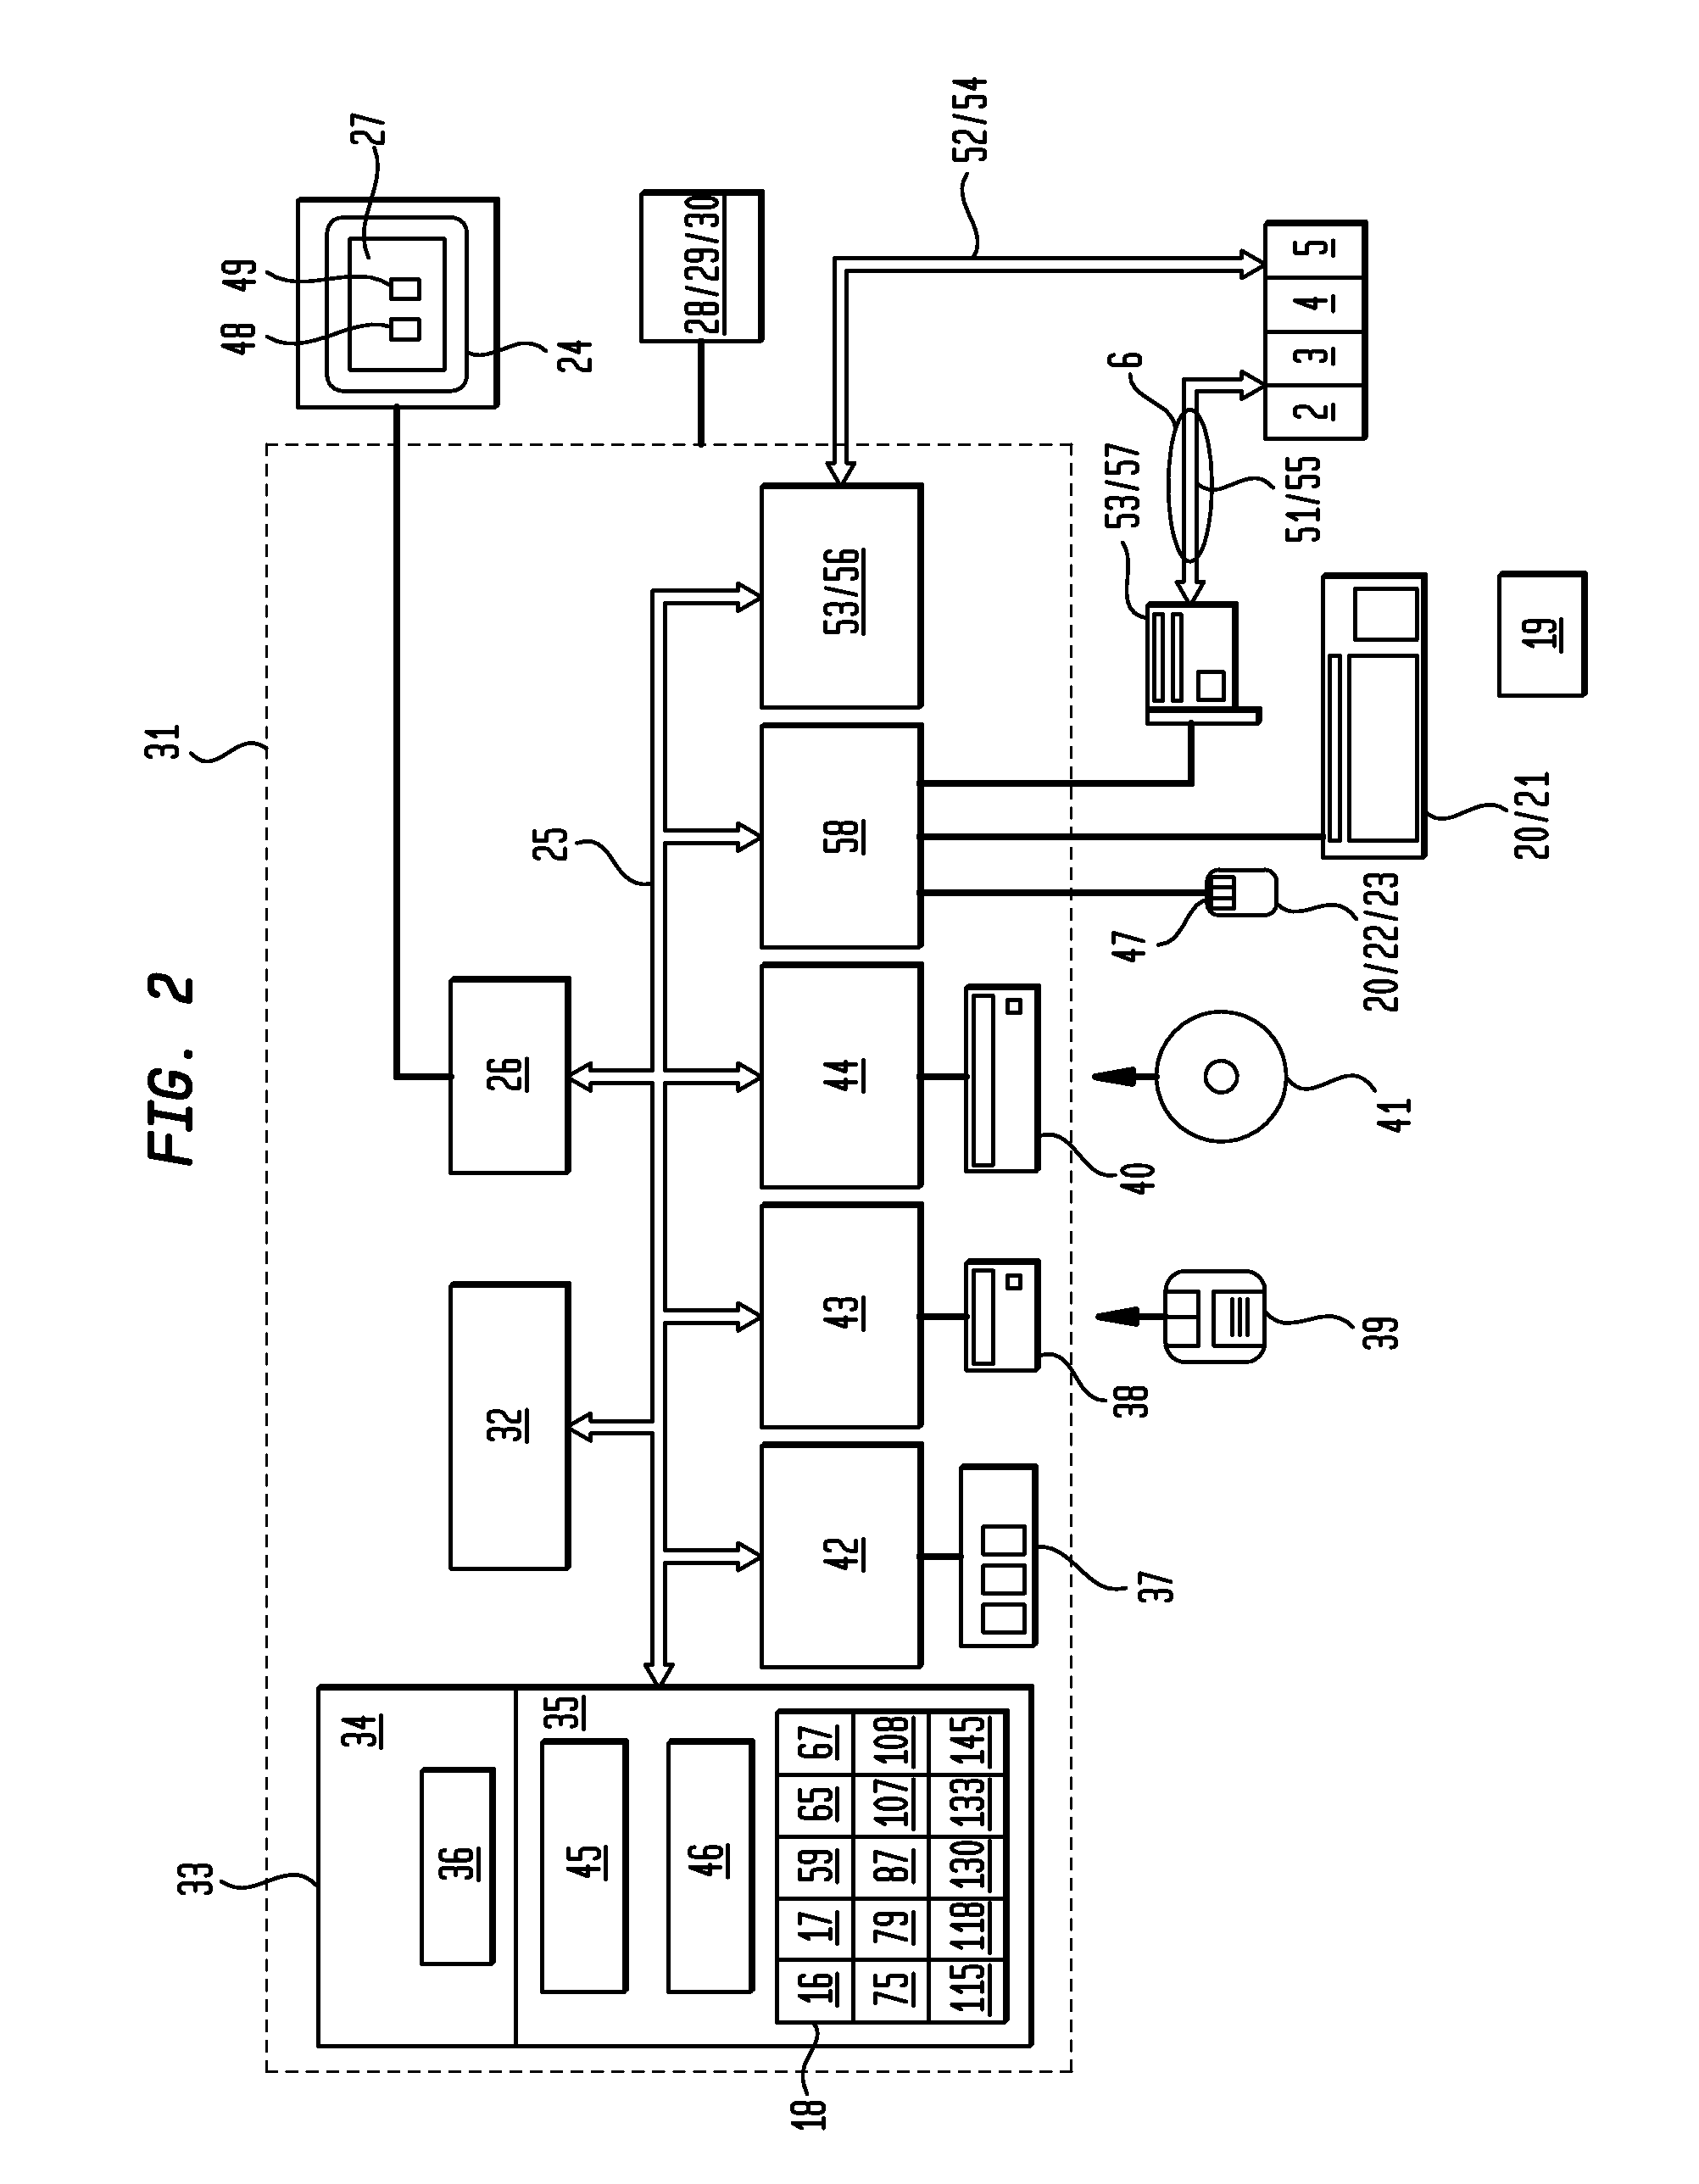 Interactive Image Display and Selection System